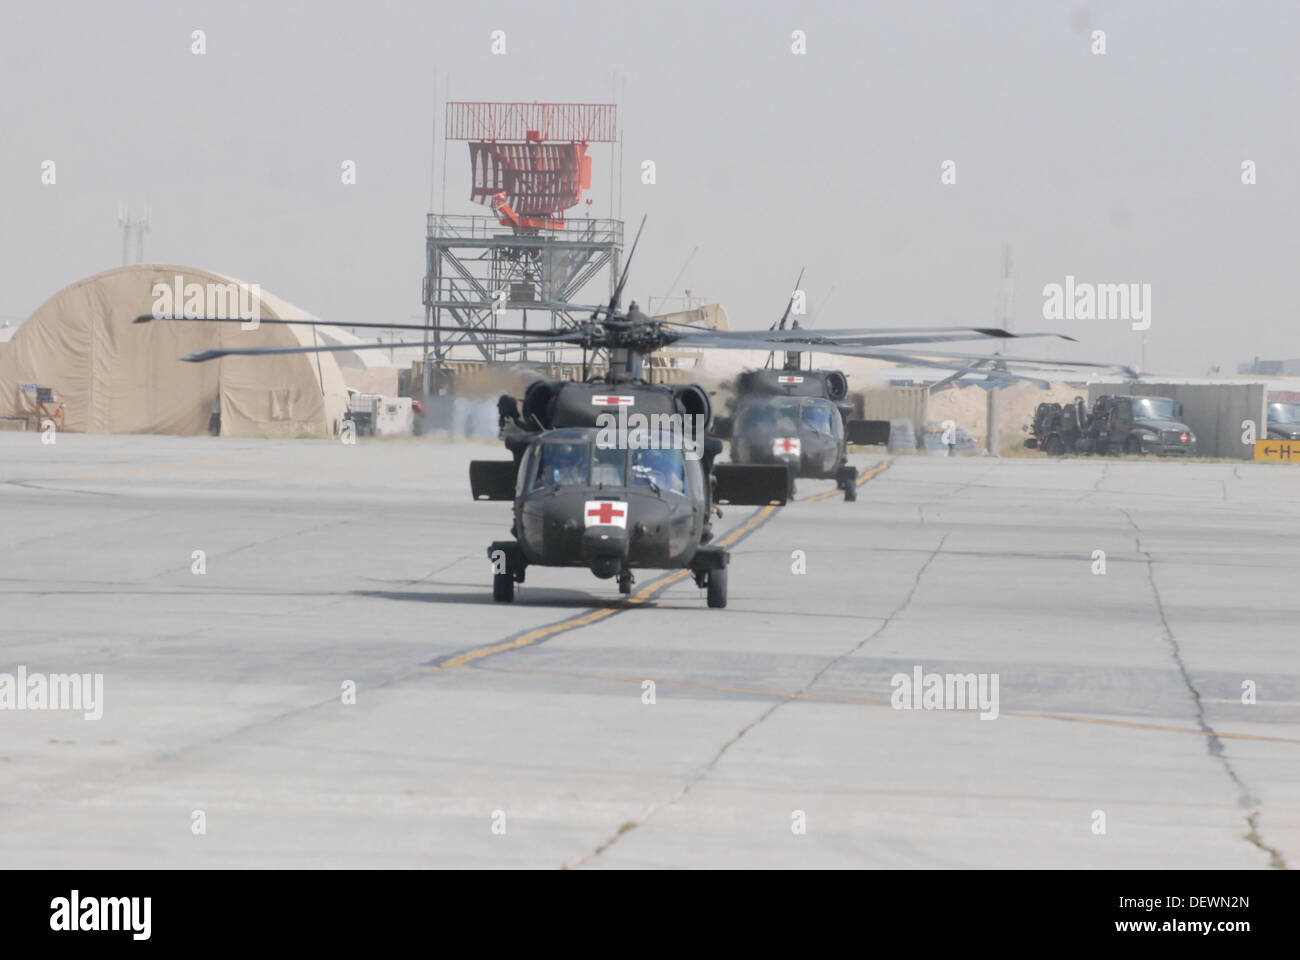 Two U.S. Army HH-60M Black Hawk medical evacuation helicopters, crewed by Soldiers of Charlie Company, 3rd Battalion (General Support), 10th Combat Aviation Brigade, Task Force Phoenix, taxi to the patient drop-off location outside Heathe N. Craig Joint T Stock Photo